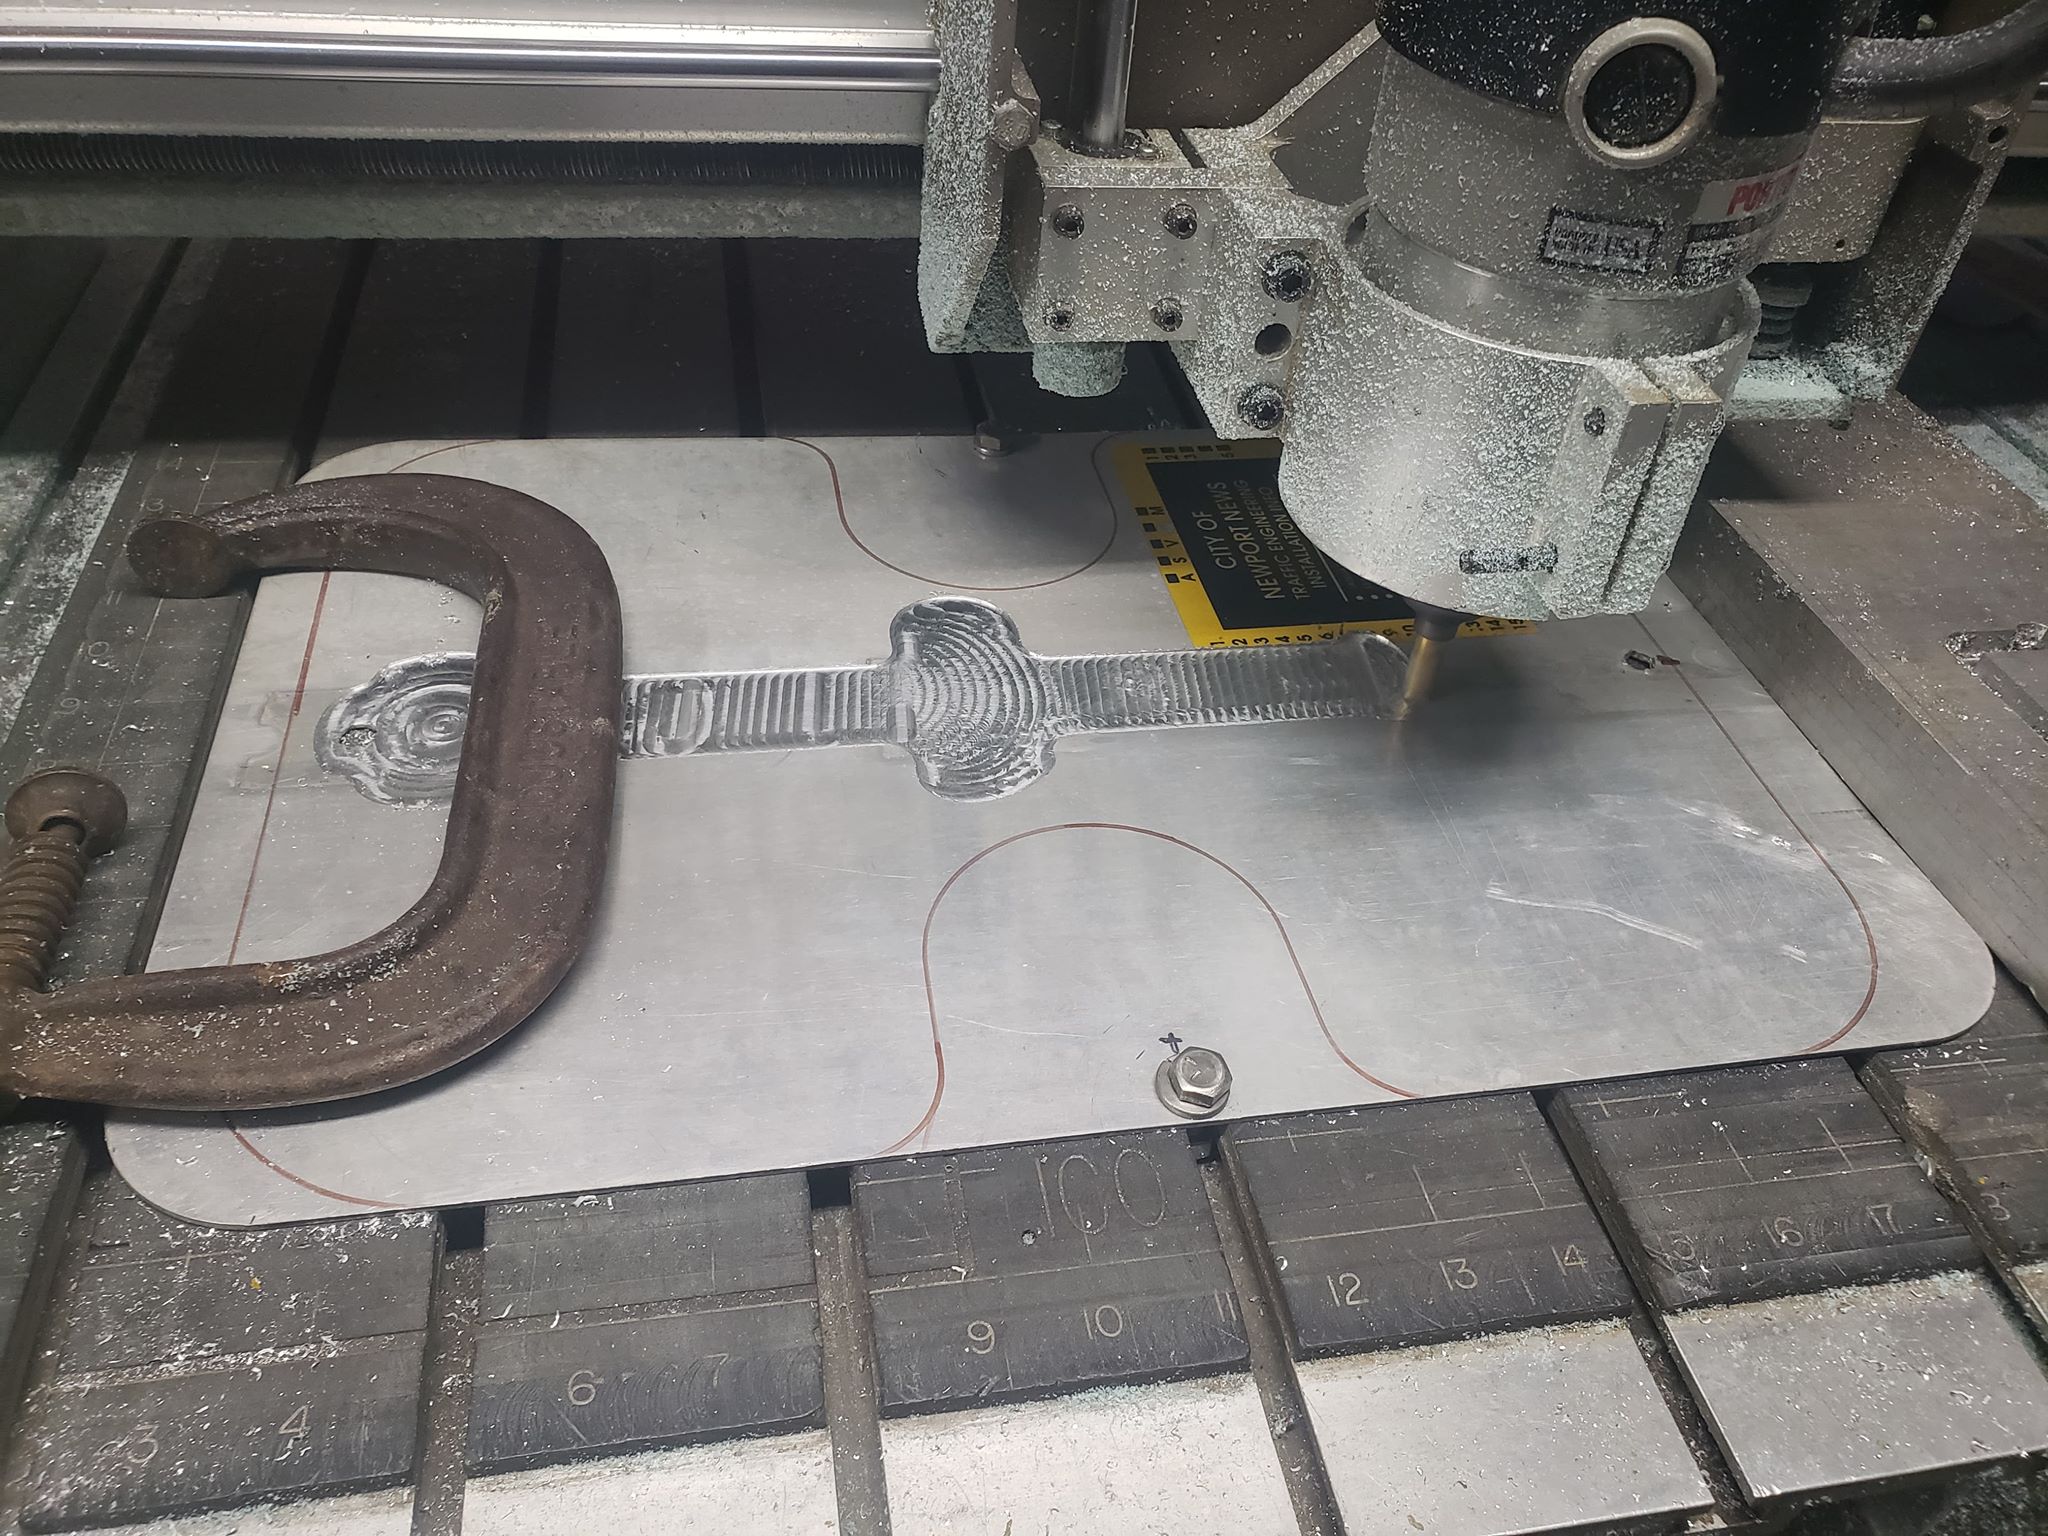 Made a few mistakes Milling but I am quite happy that I actually got this thing to come out without having to pull out another street sign to destroy.